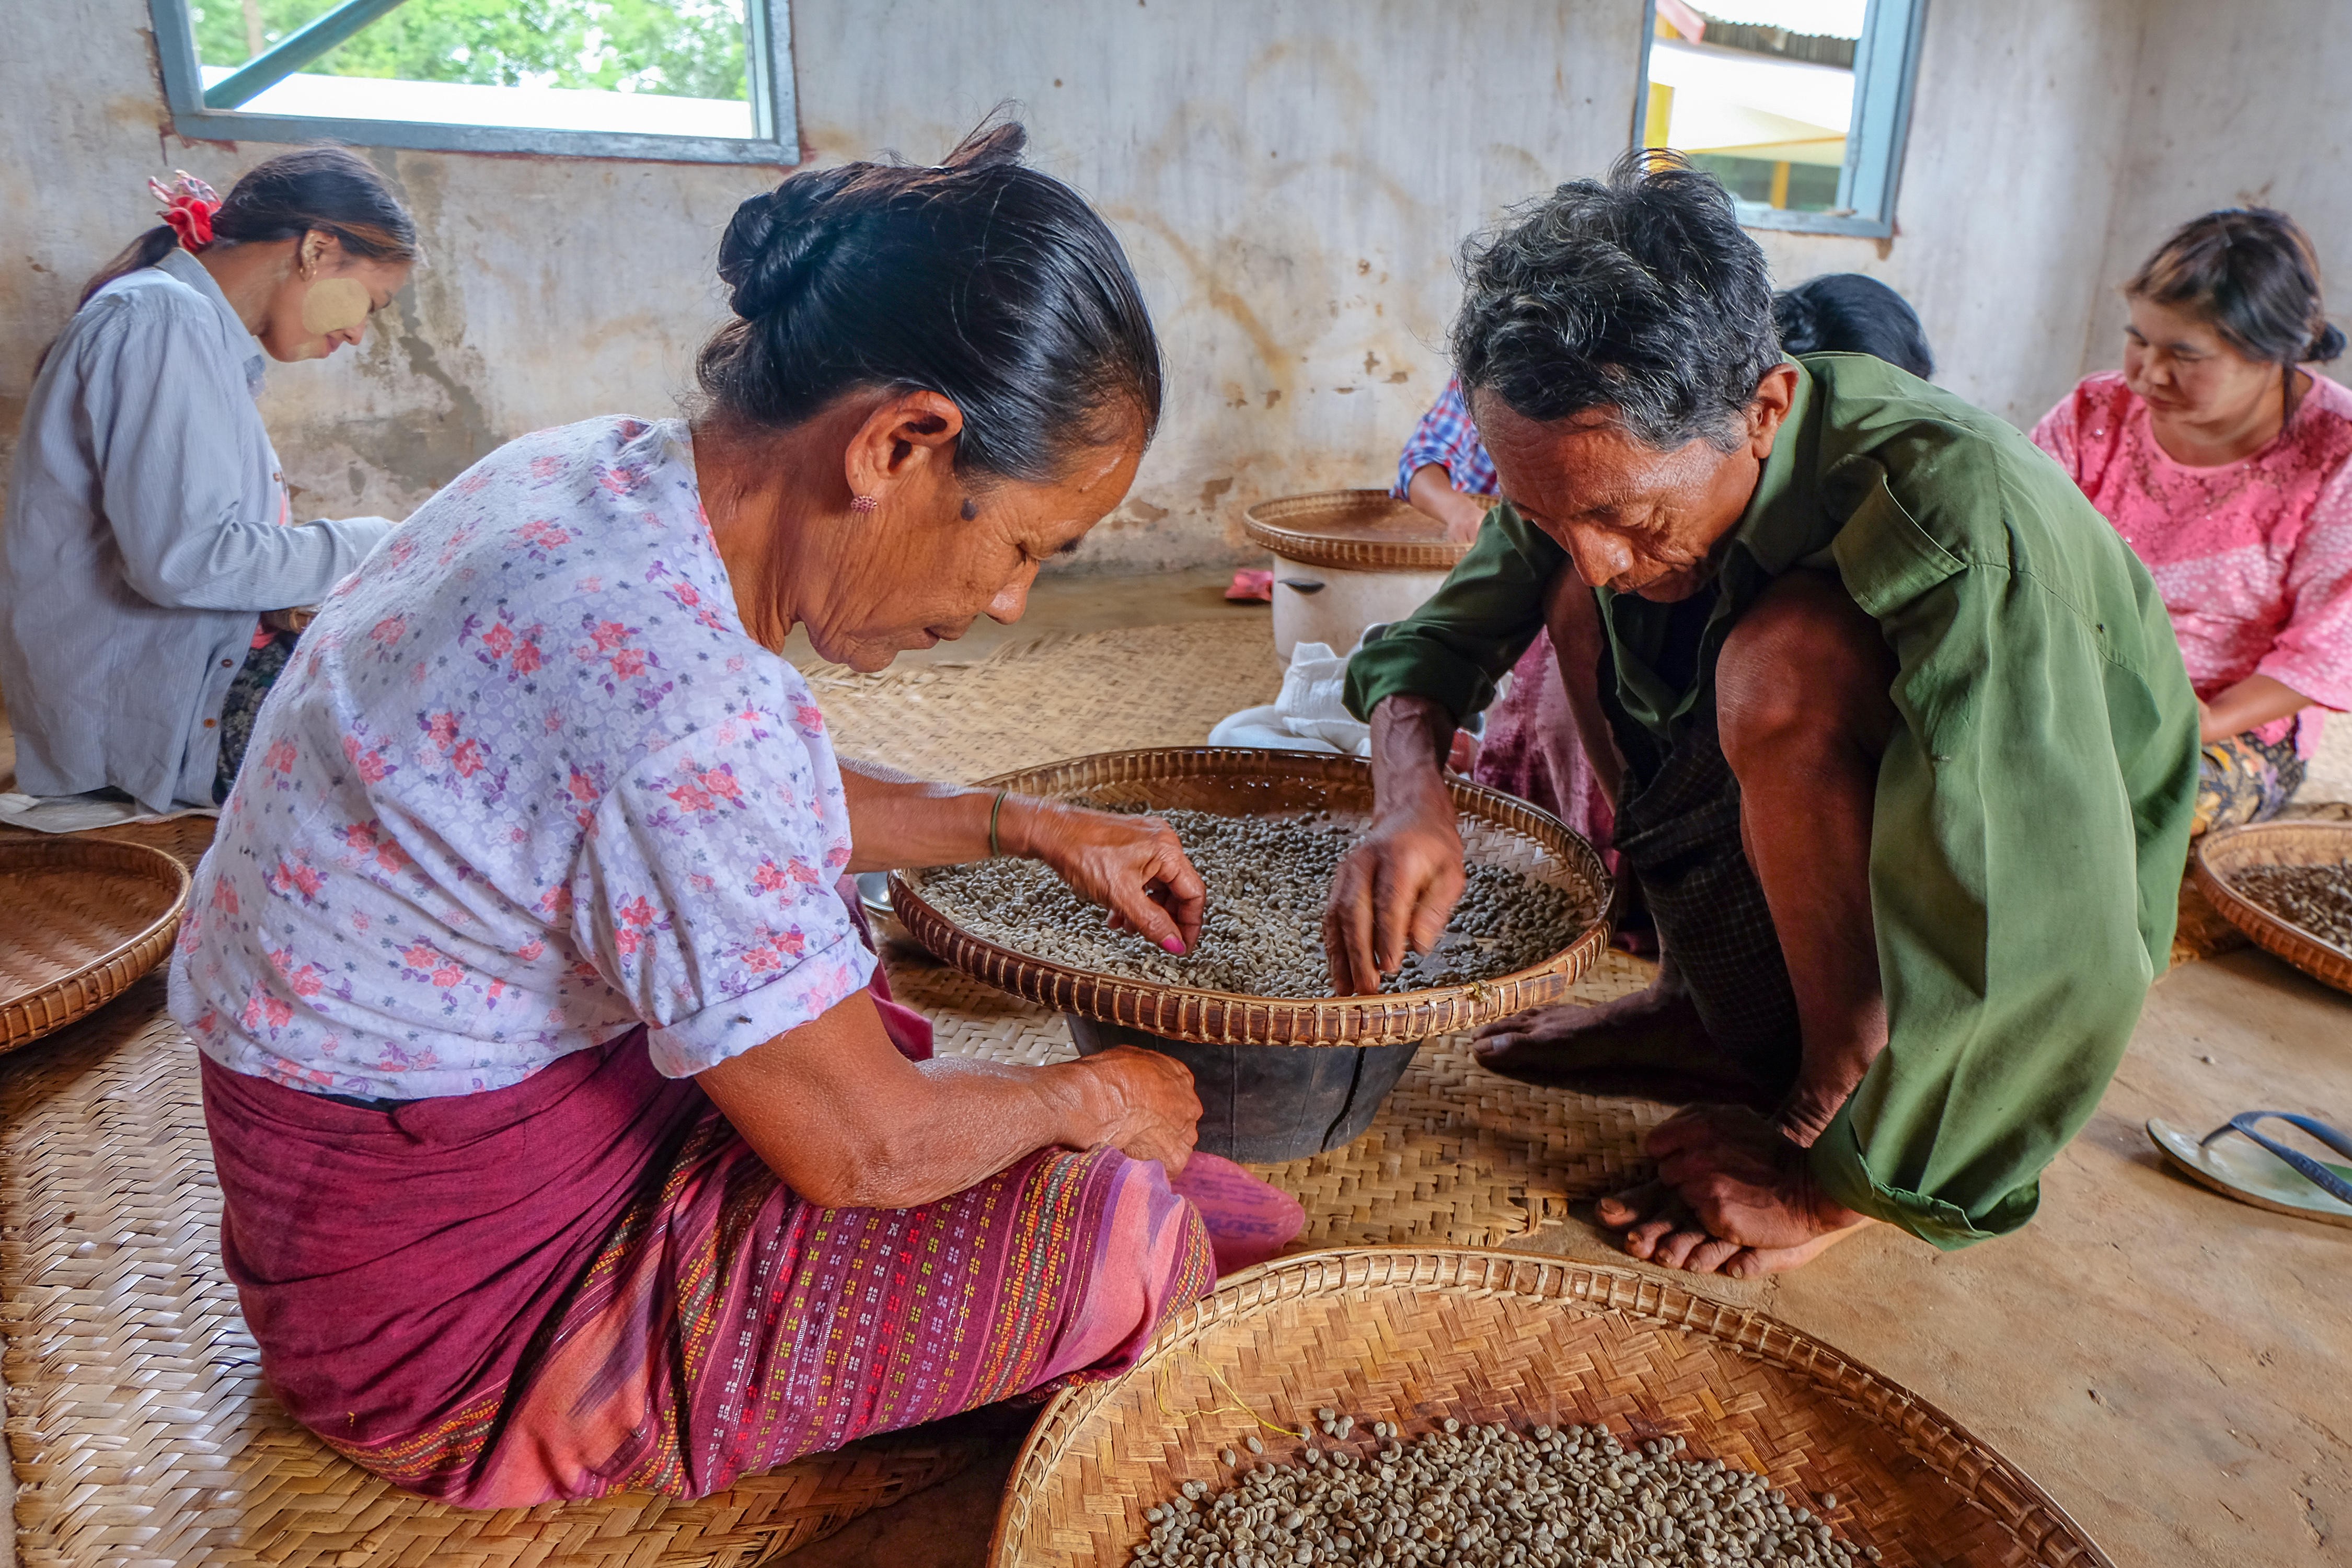 Workers grading beans at a coffee factory in Pyin Oo Lwin district in Myanmar. Photo: Alamy